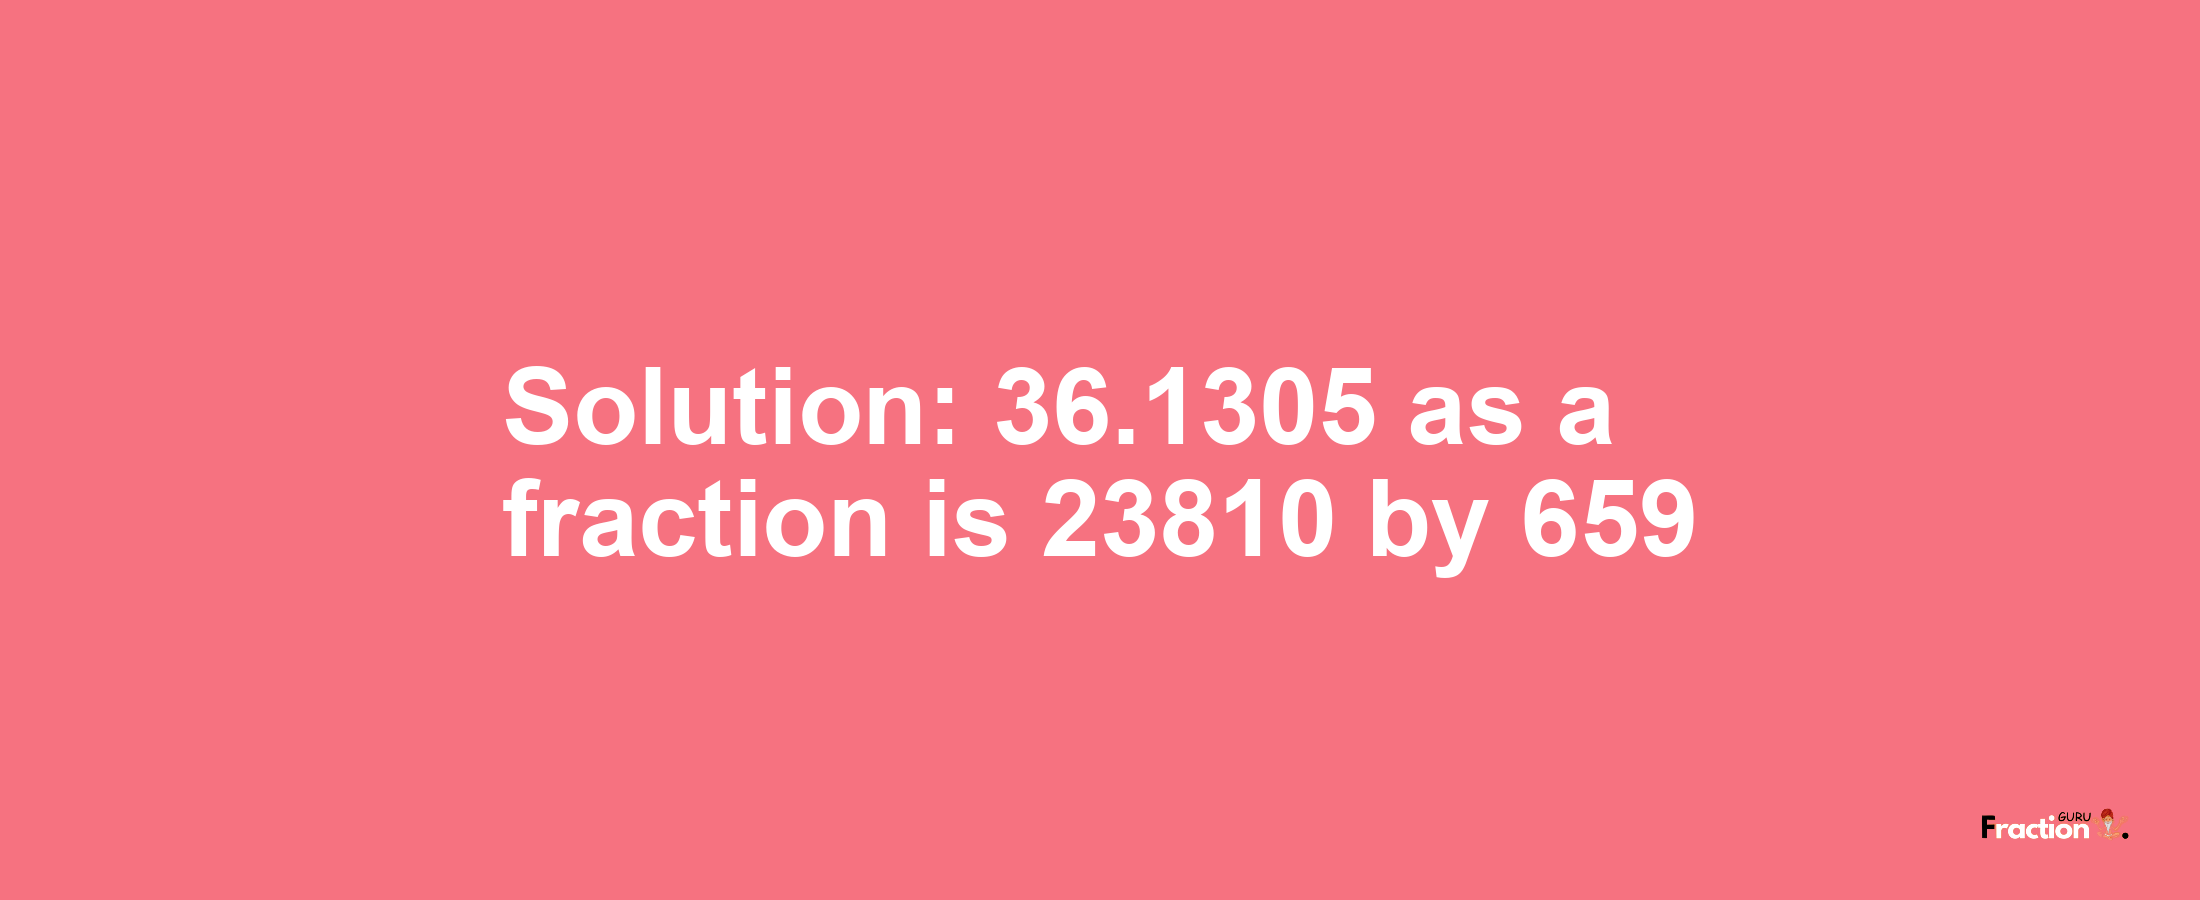 Solution:36.1305 as a fraction is 23810/659